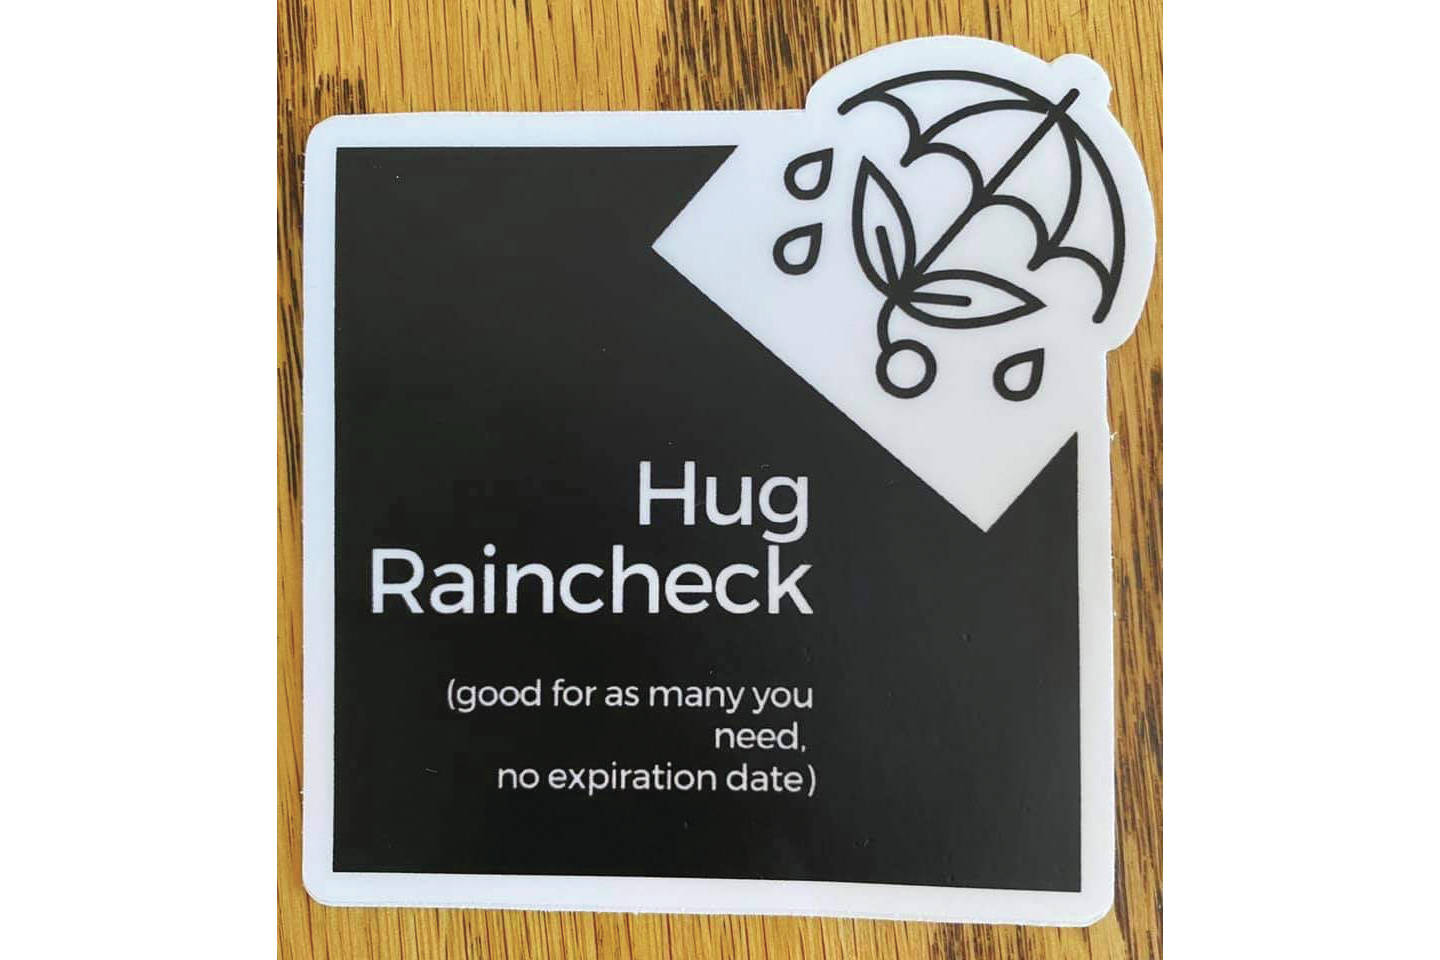 A "hug raincheck" sticker Flo Larson received in the summer of 2020 in Homer, Alaska, made her realize how much she missed human contact during the COVID-19 pandemic, she writes. (Photo courtesy Flo Larson)